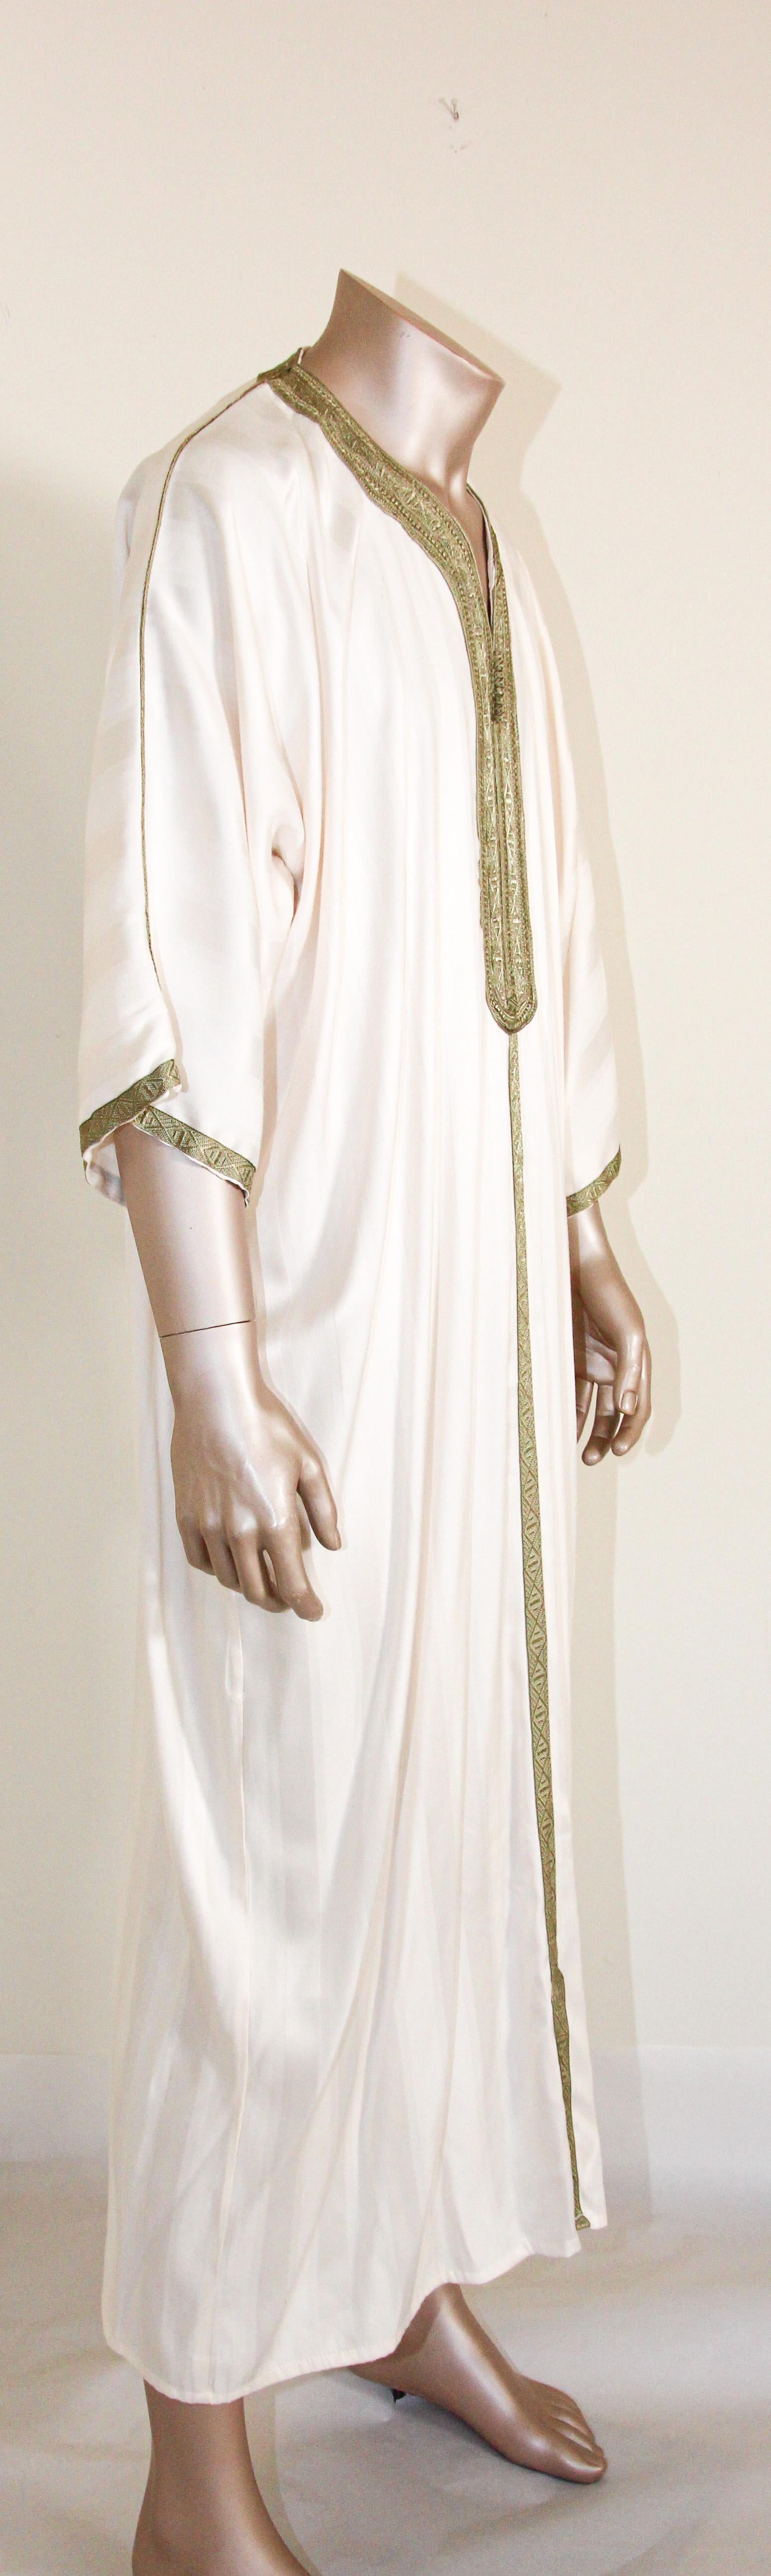 Moroccan Vintage Gentleman Caftan White with Green Trim For Sale 1